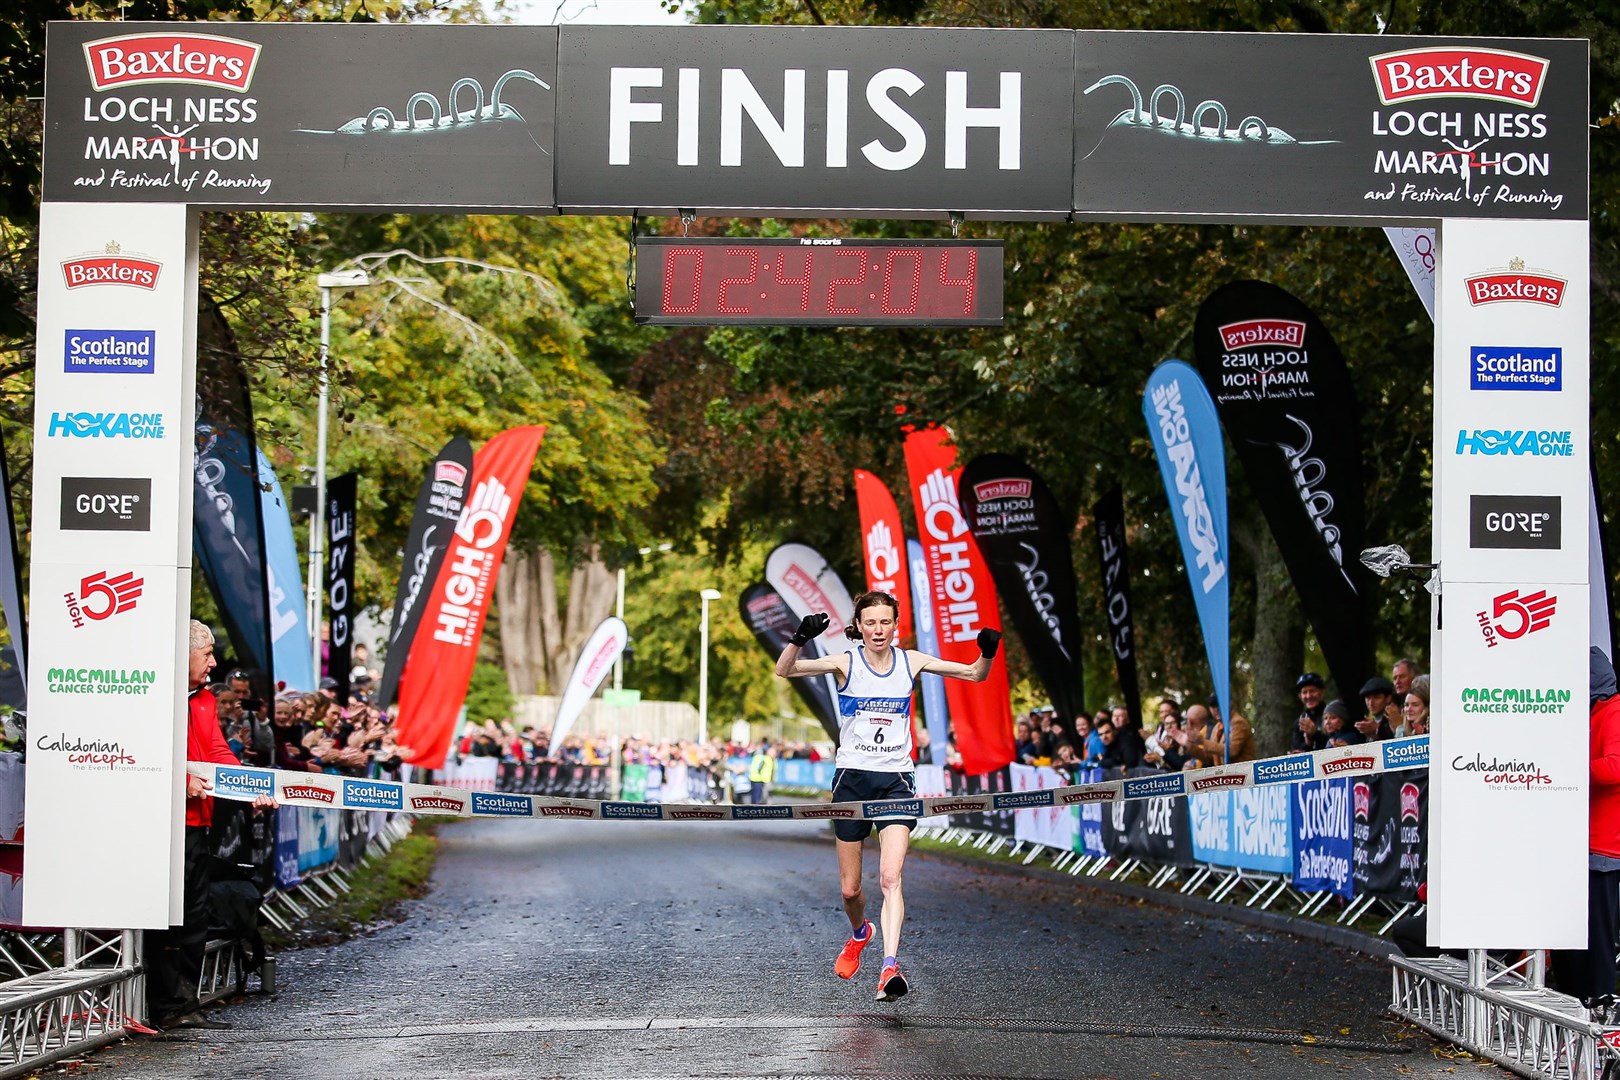 The 2020 Loch Ness Marathon and Festival of Running is off.